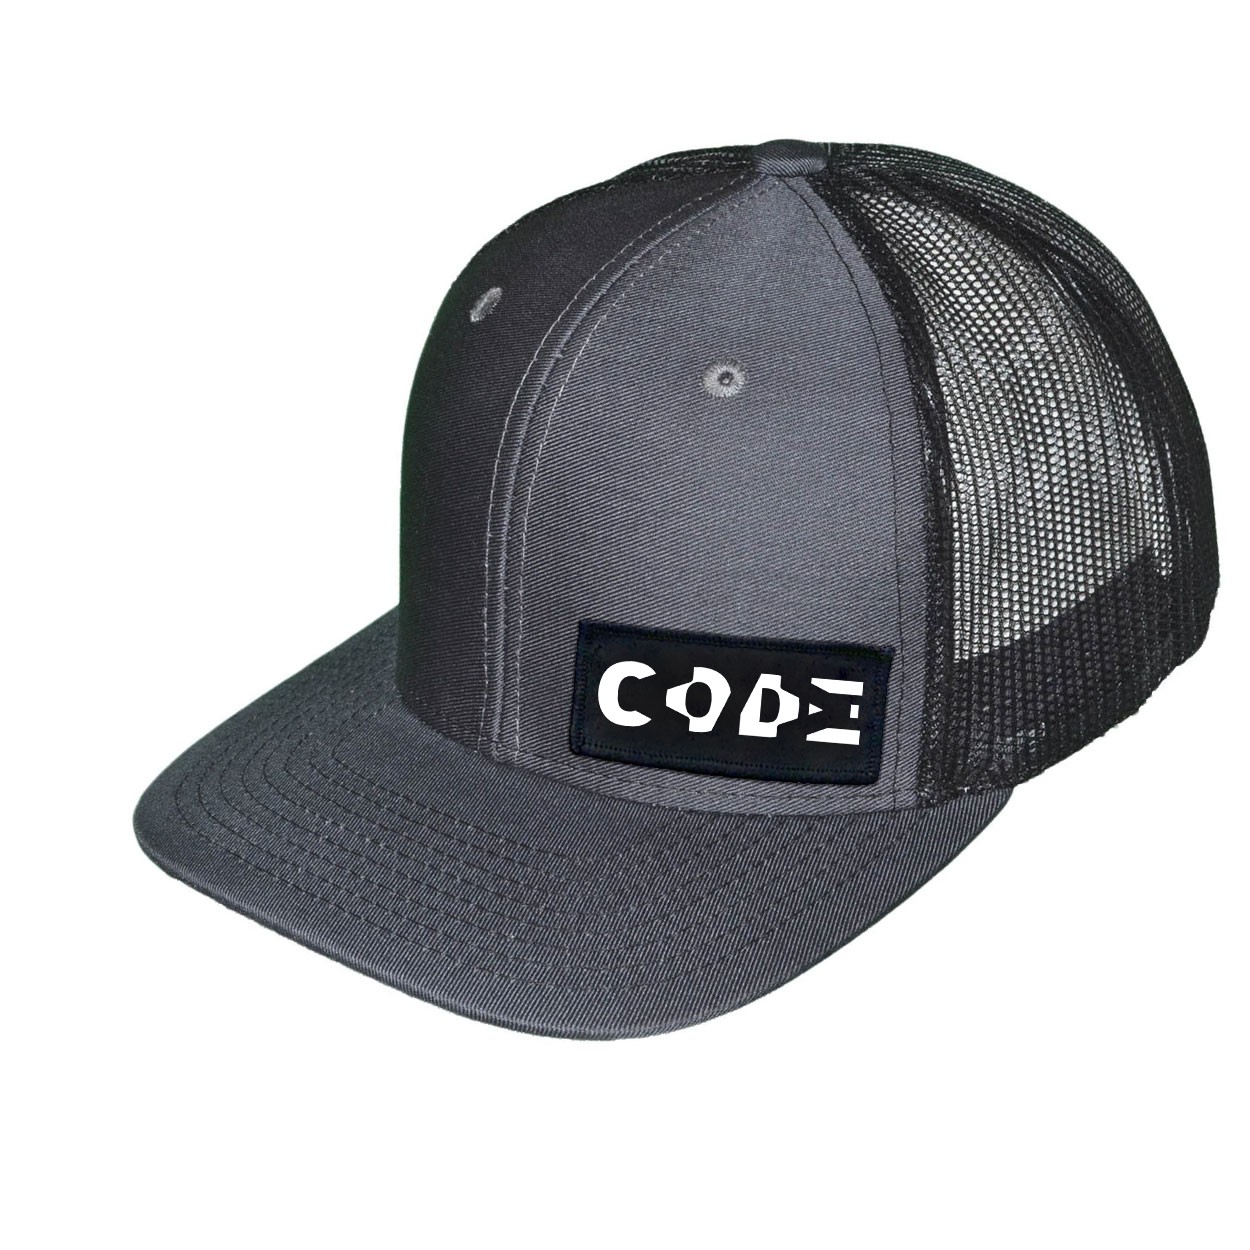 Code Tag Logo Night Out Woven Patch Snapback Trucker Hat Gray/Black (White Logo)